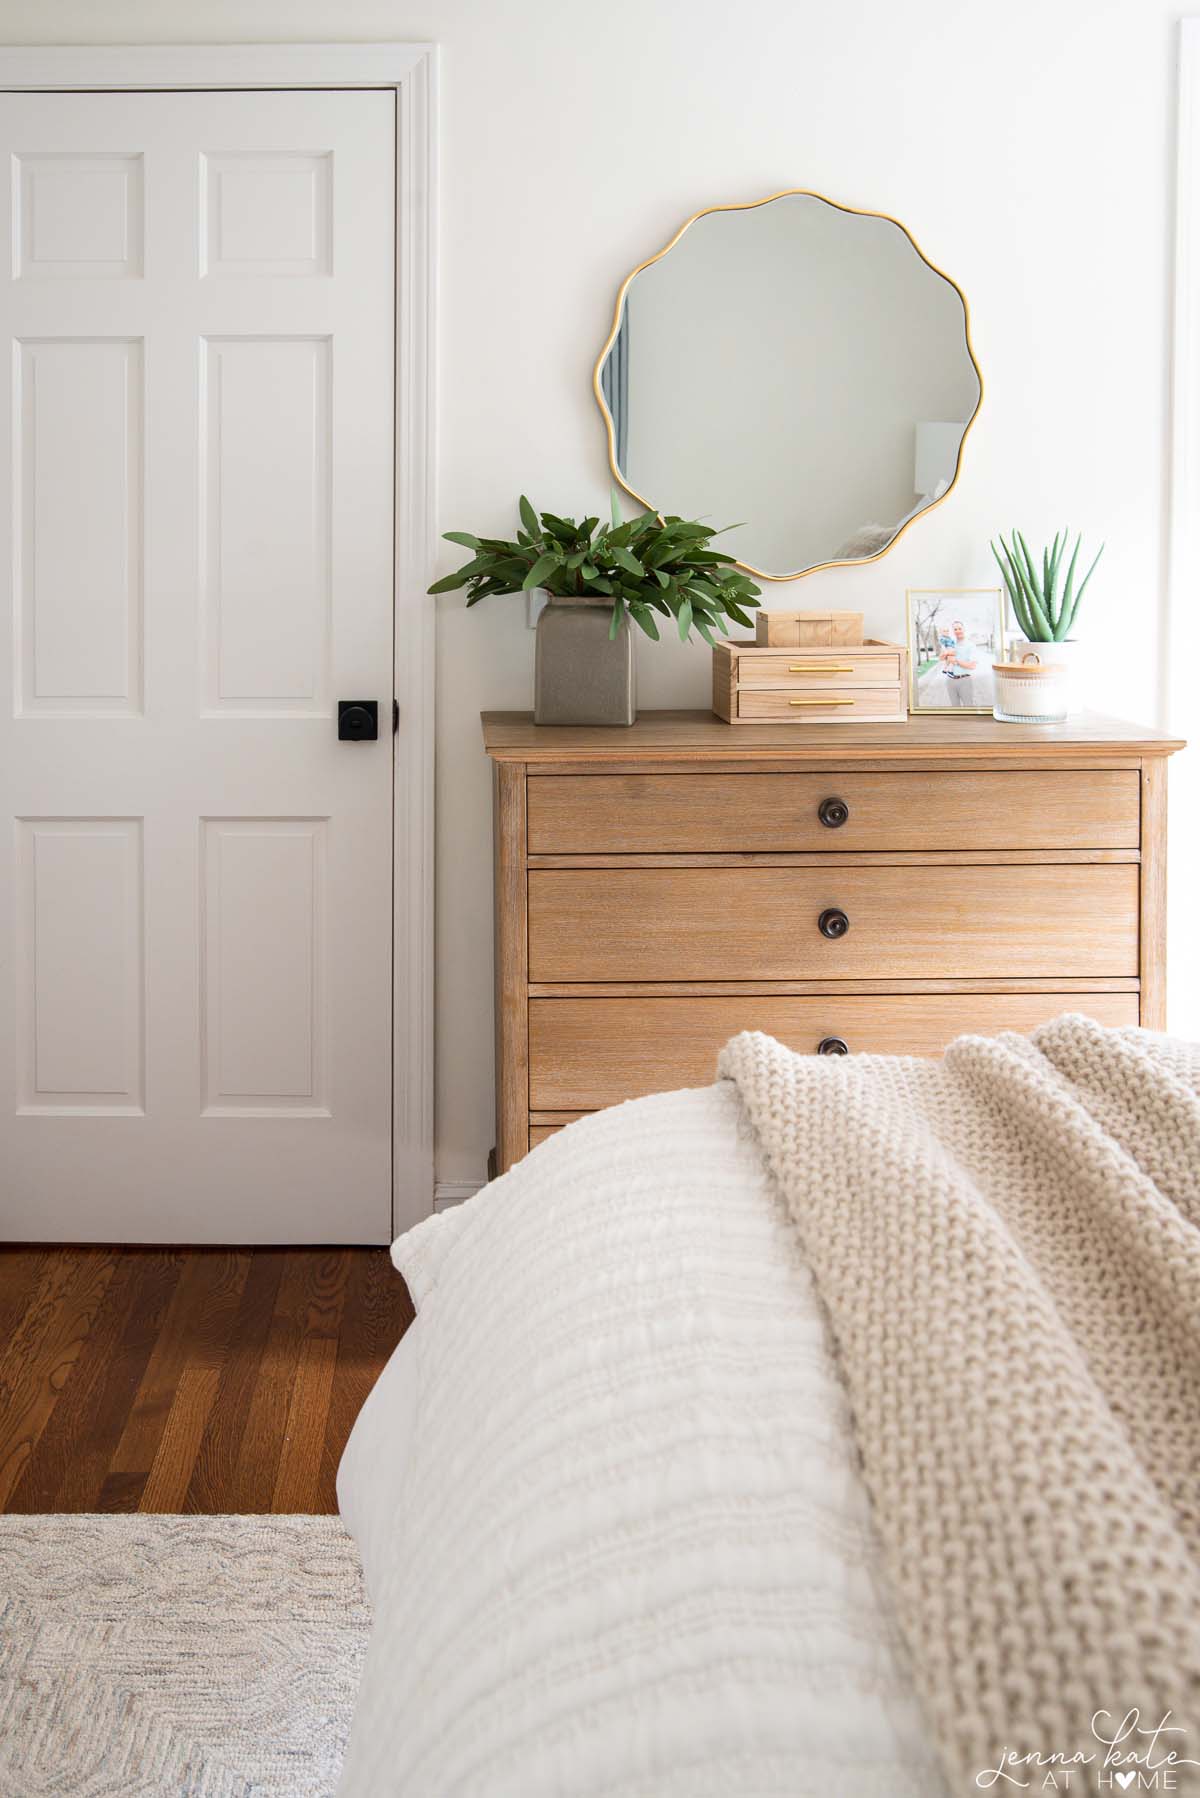 Wave mirror look for less over a white oak dresser